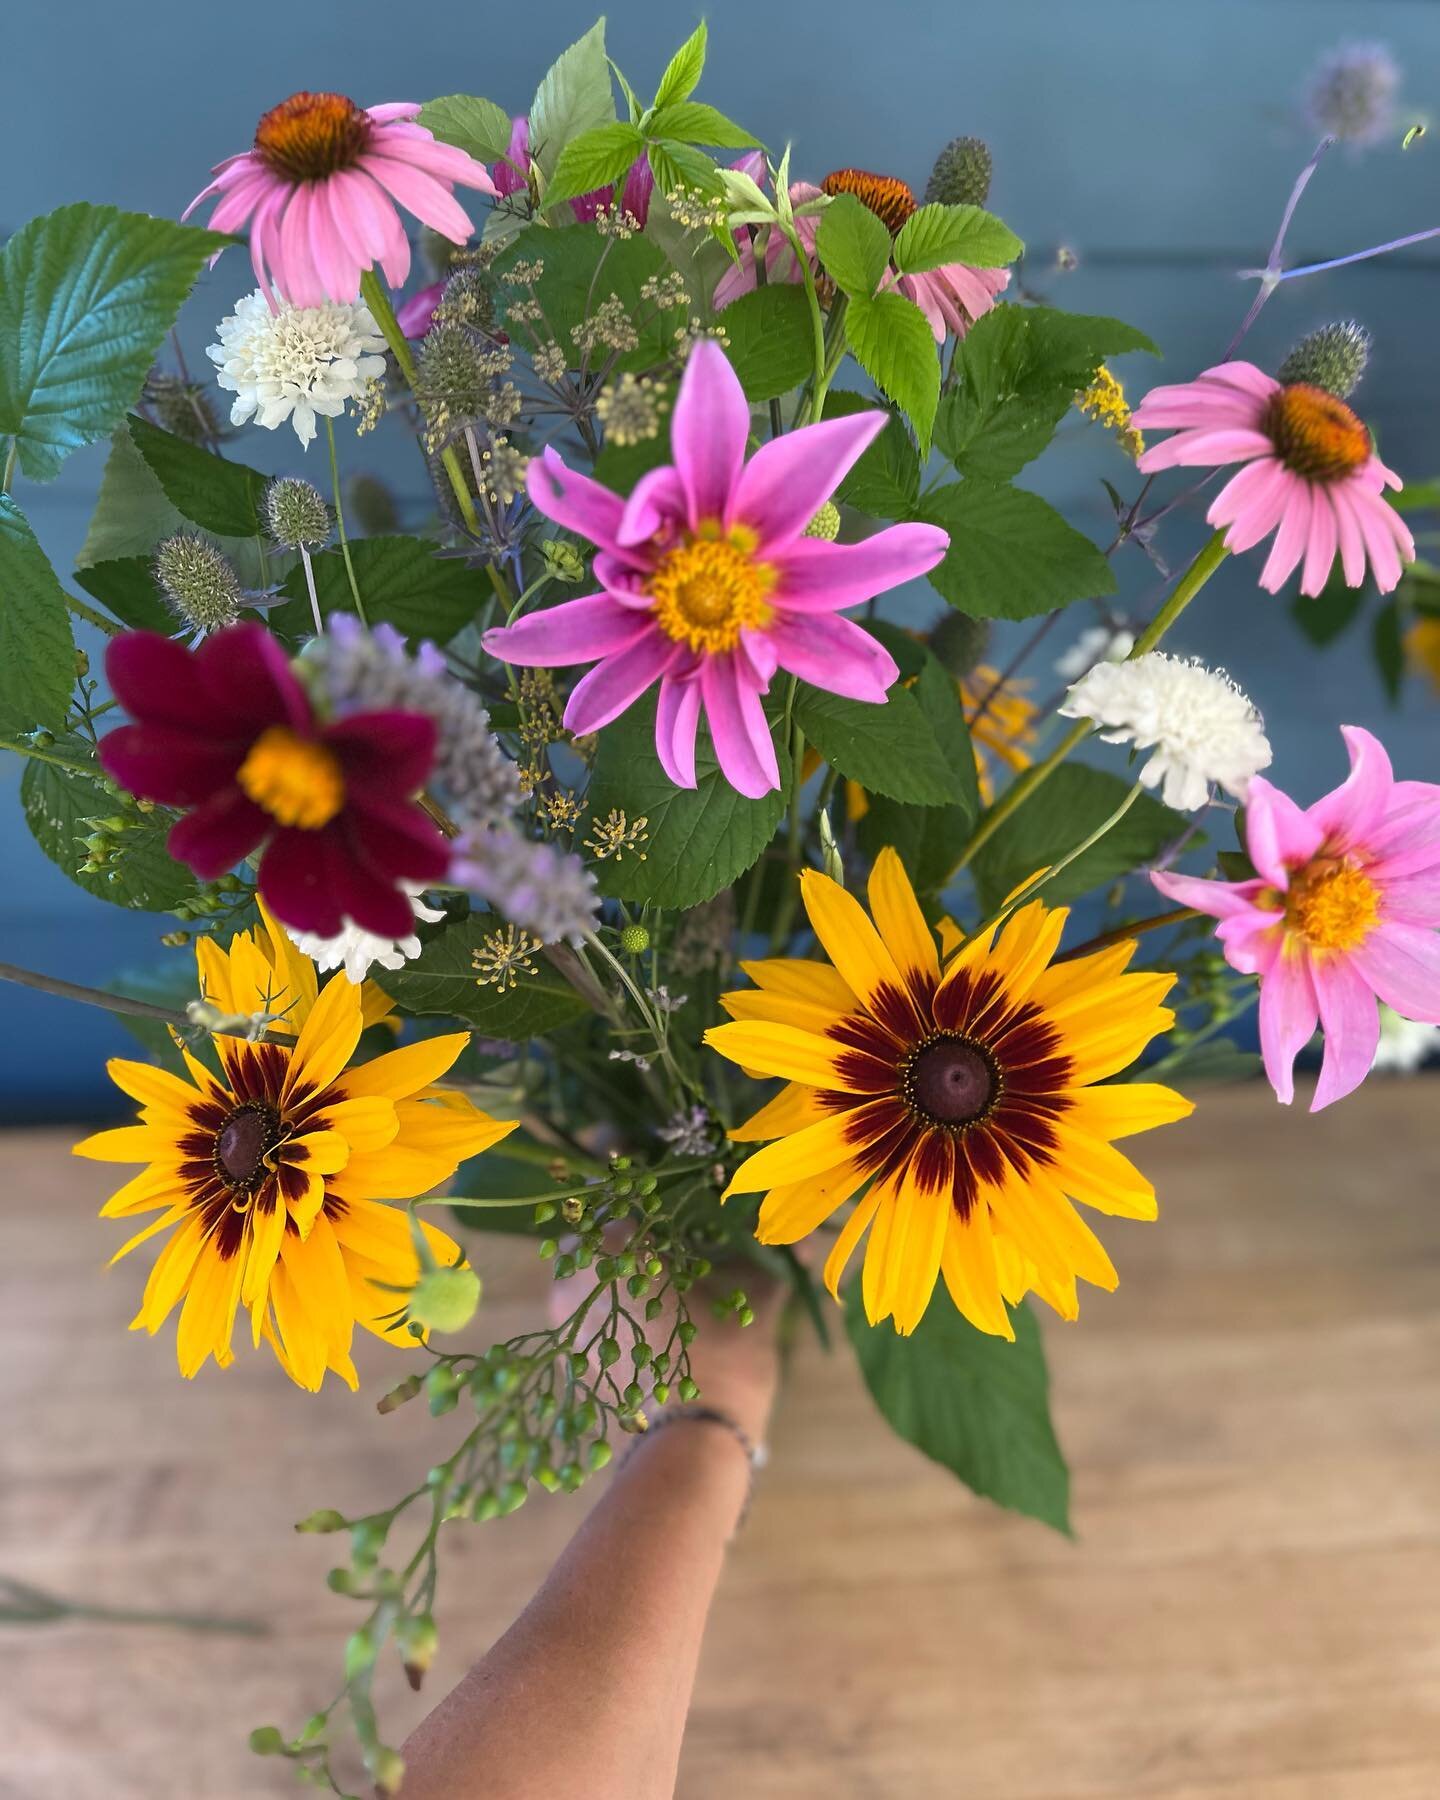 I tried to take some photos of the bouquets for the csa subscriptions today but kept getting all distracted by the bees landing in the bouquets (as you can probably tell:) I mean, if they are good enough for the bees they are good enough for me! #bee